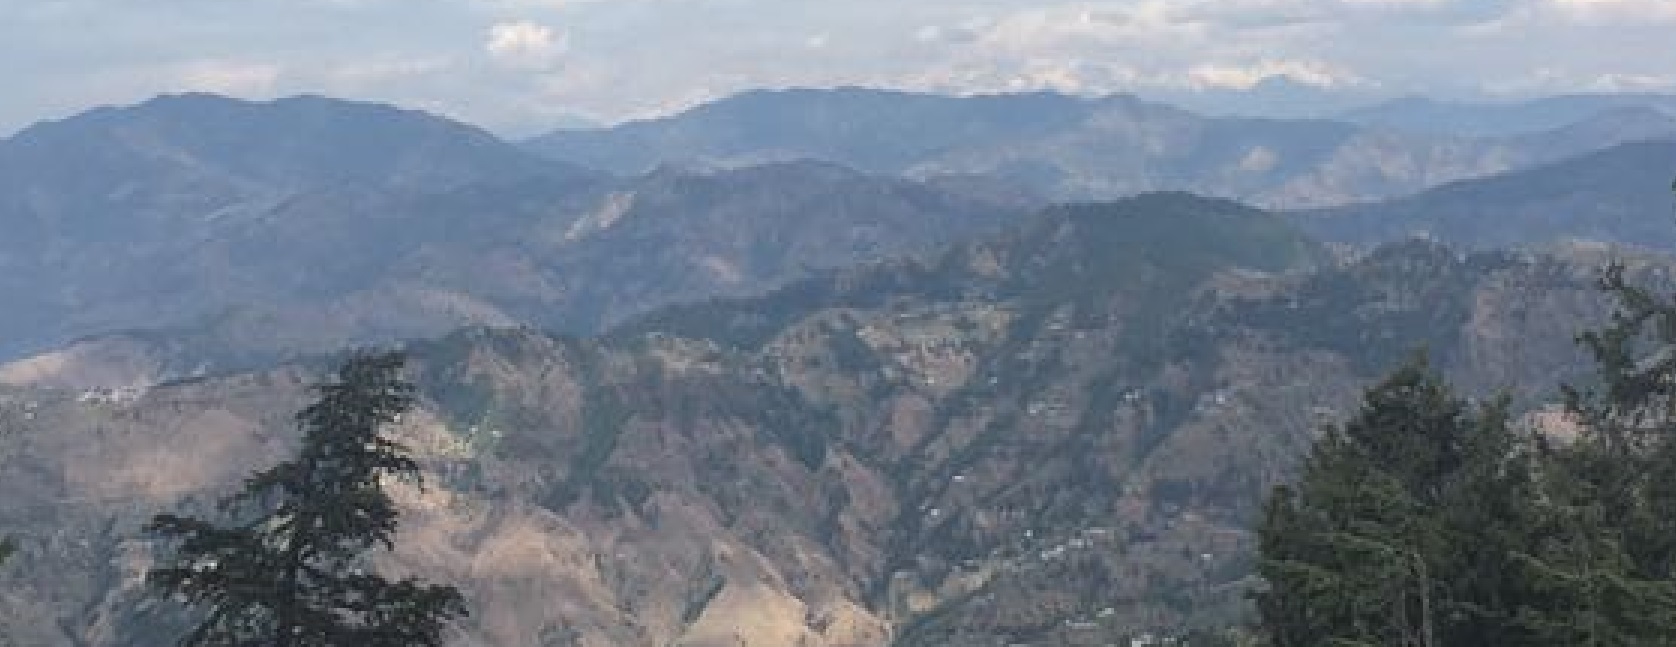 Lal Tibba in Mussoorie